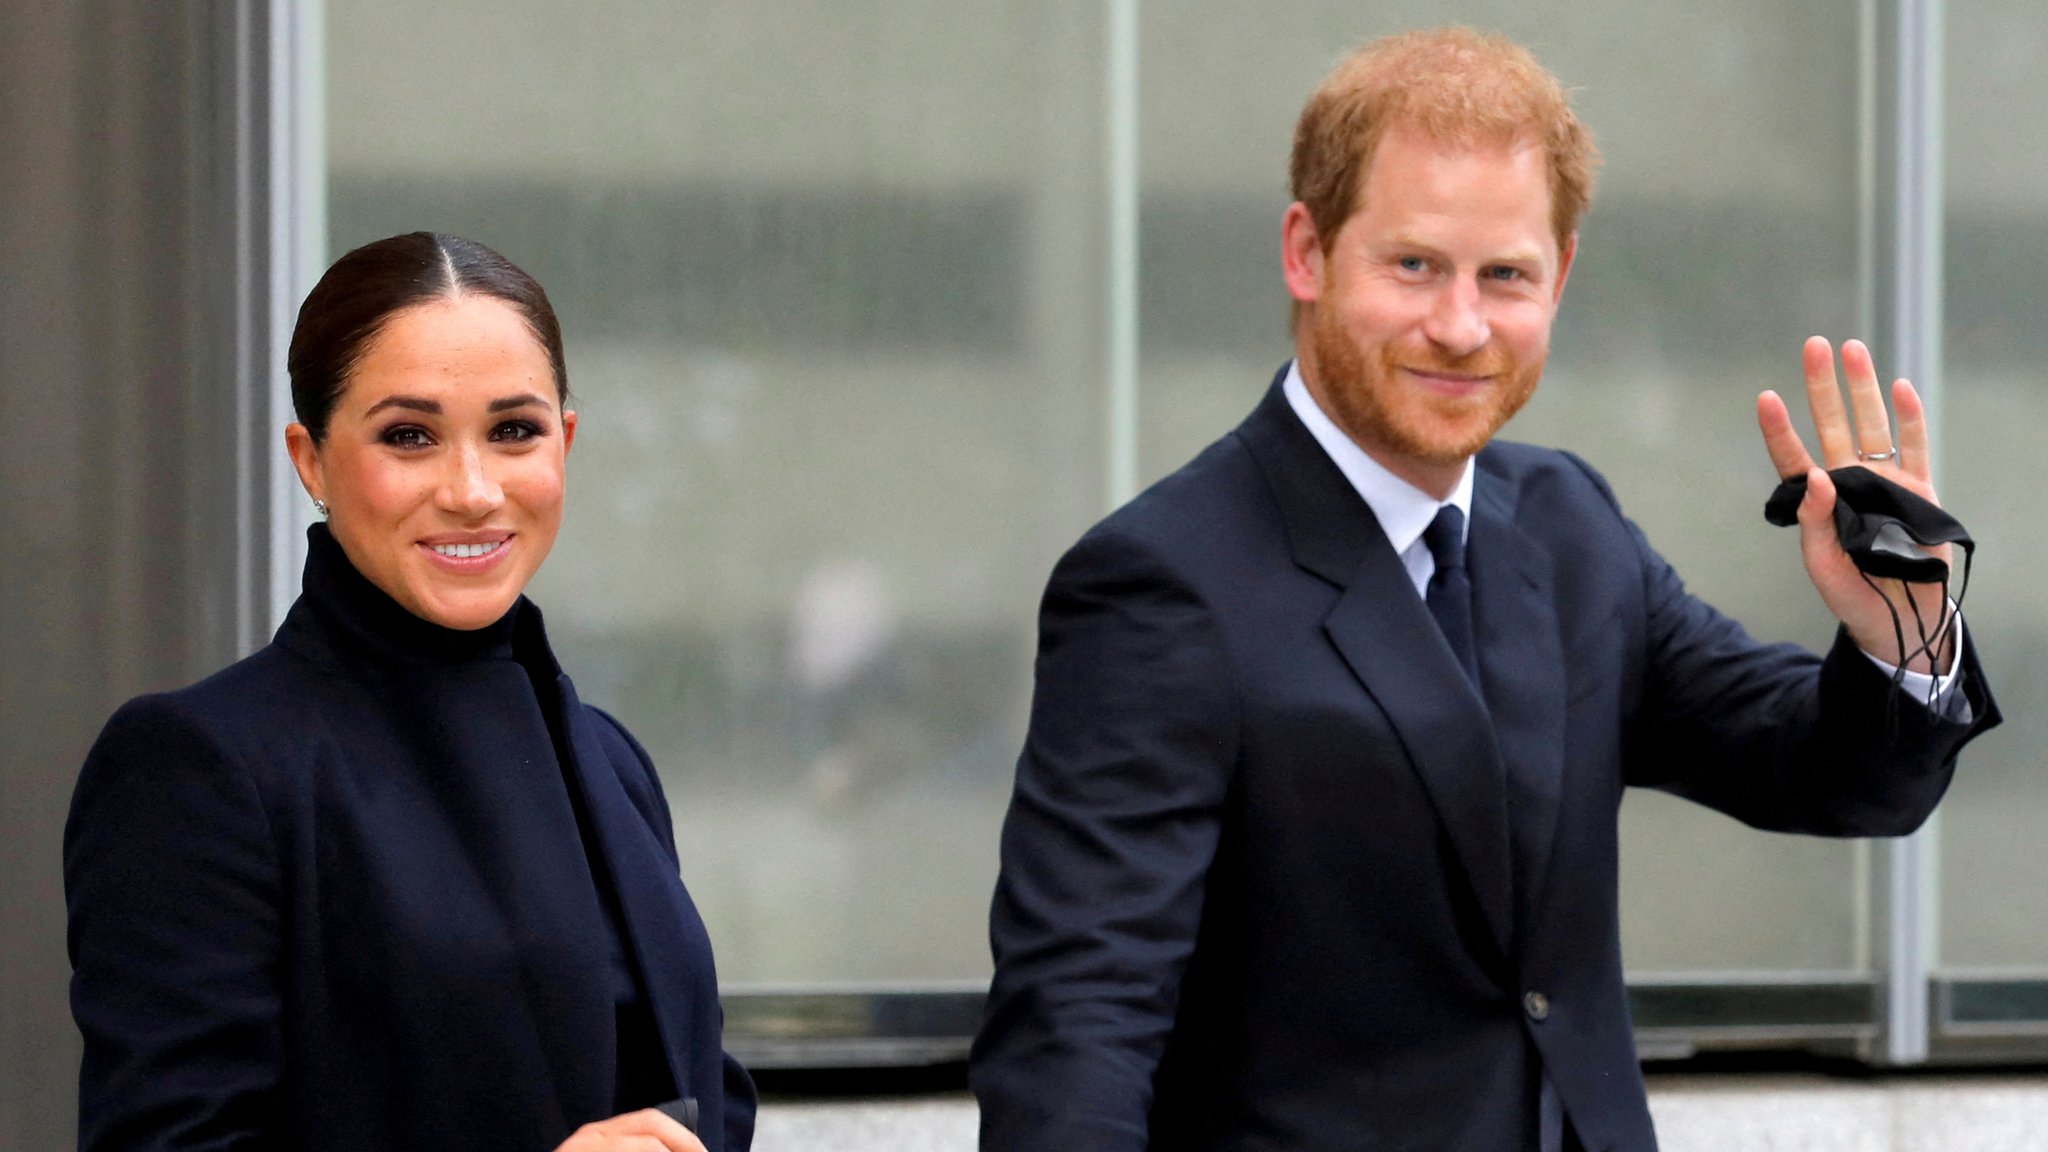 Prince Harry says he is taking legal action to stop hate towards him and Meghan